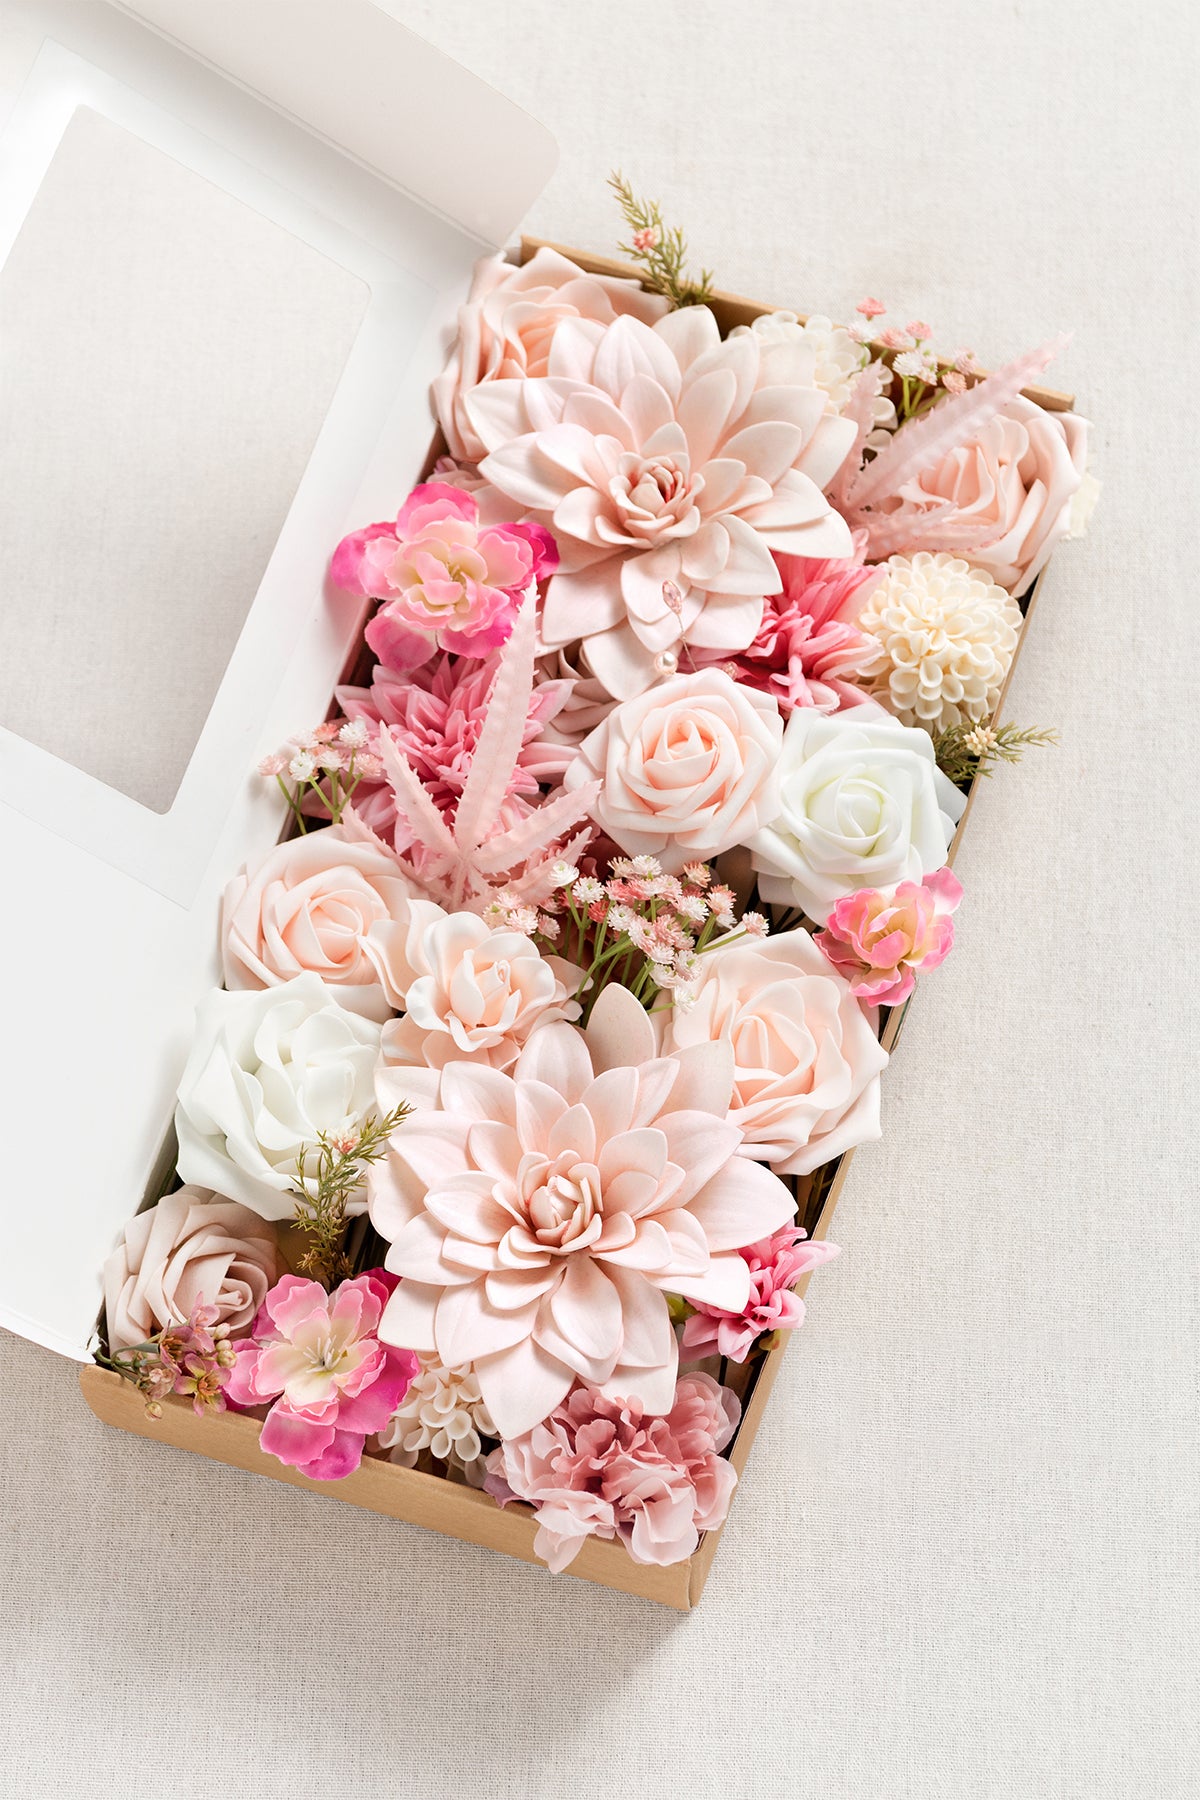 DIY Kits For Centerpieces in Pink Colors